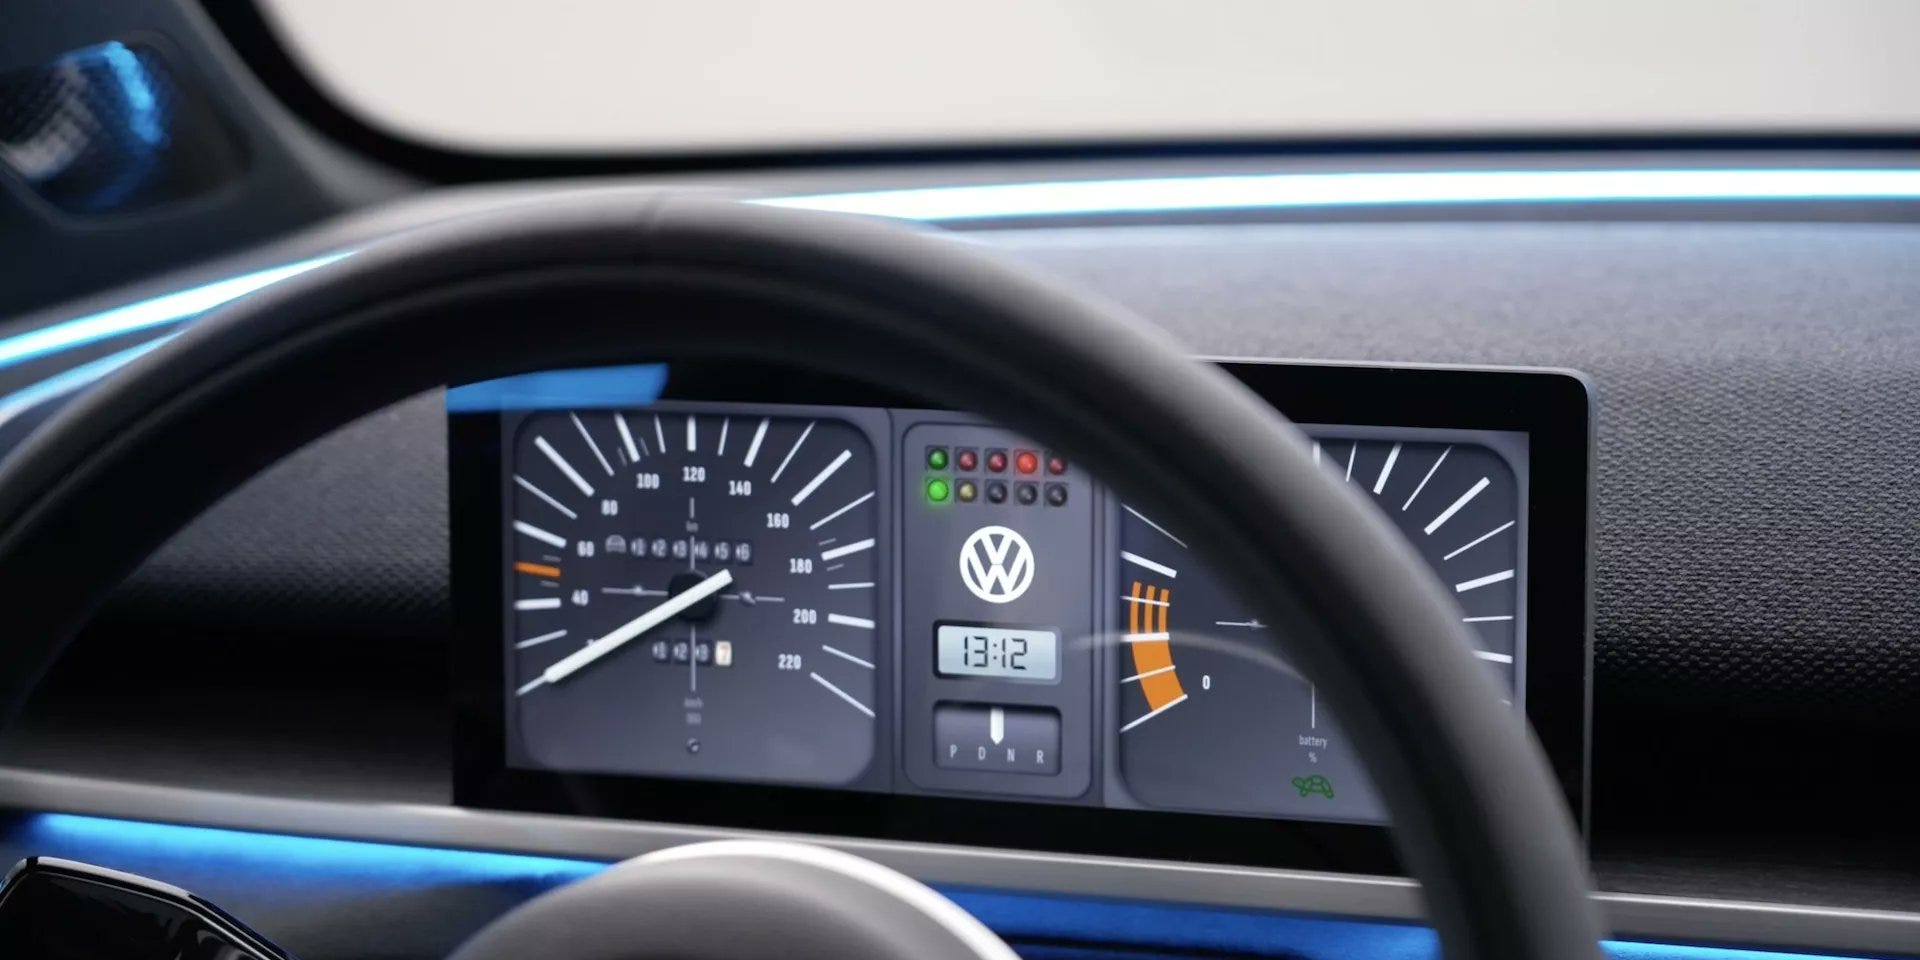 VW ID 2all Concept Features Retro Gauge Designs From the Mk1 Golf and Classic Beetle